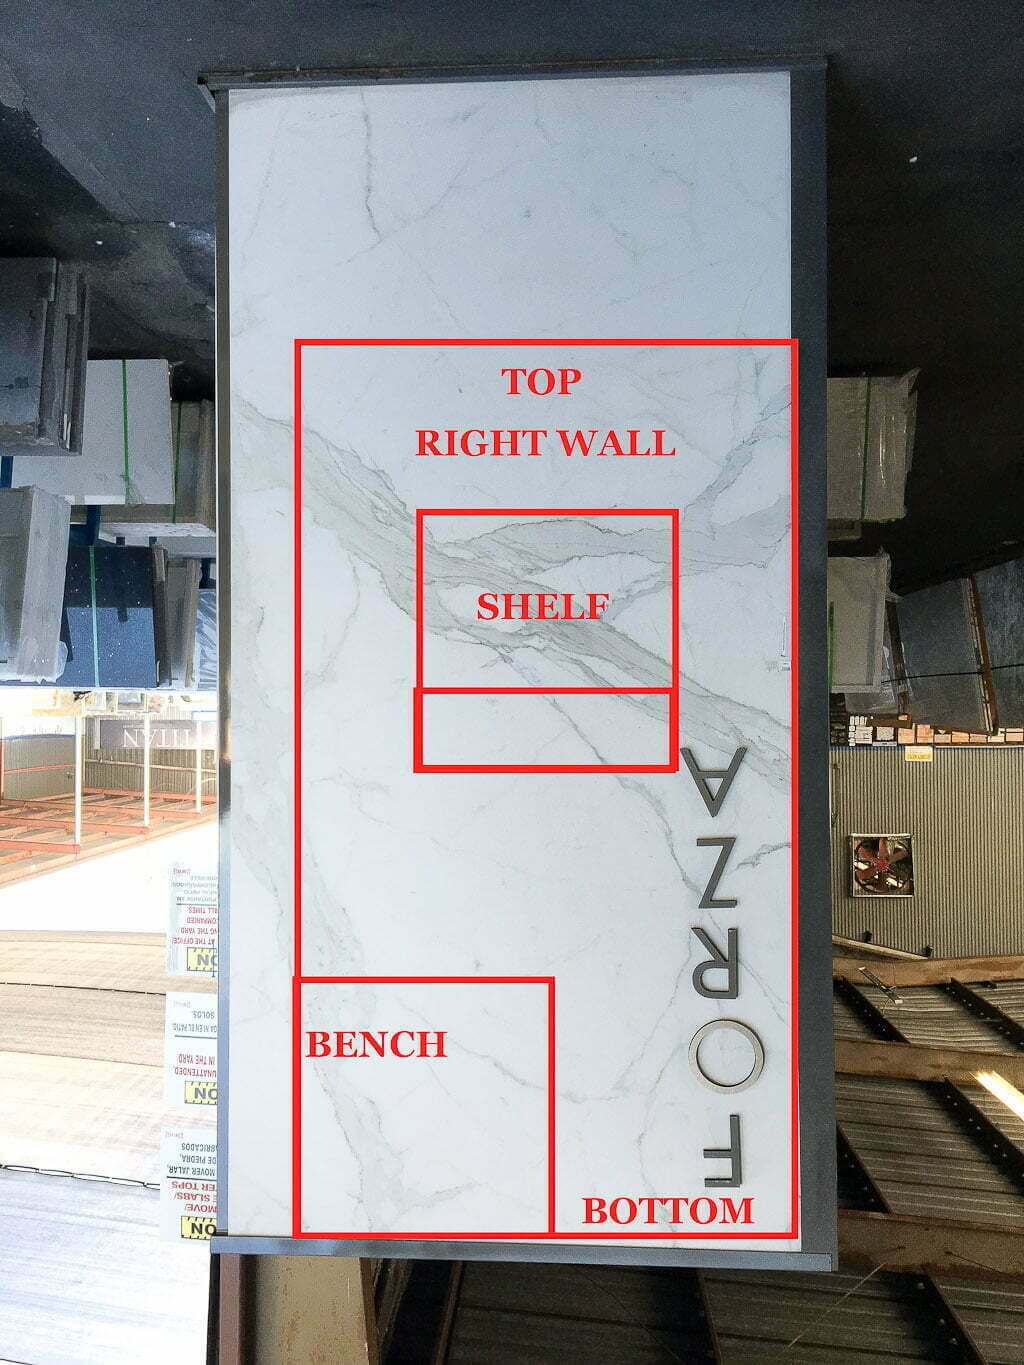 solid surface porcelain slab with red markings for cuts